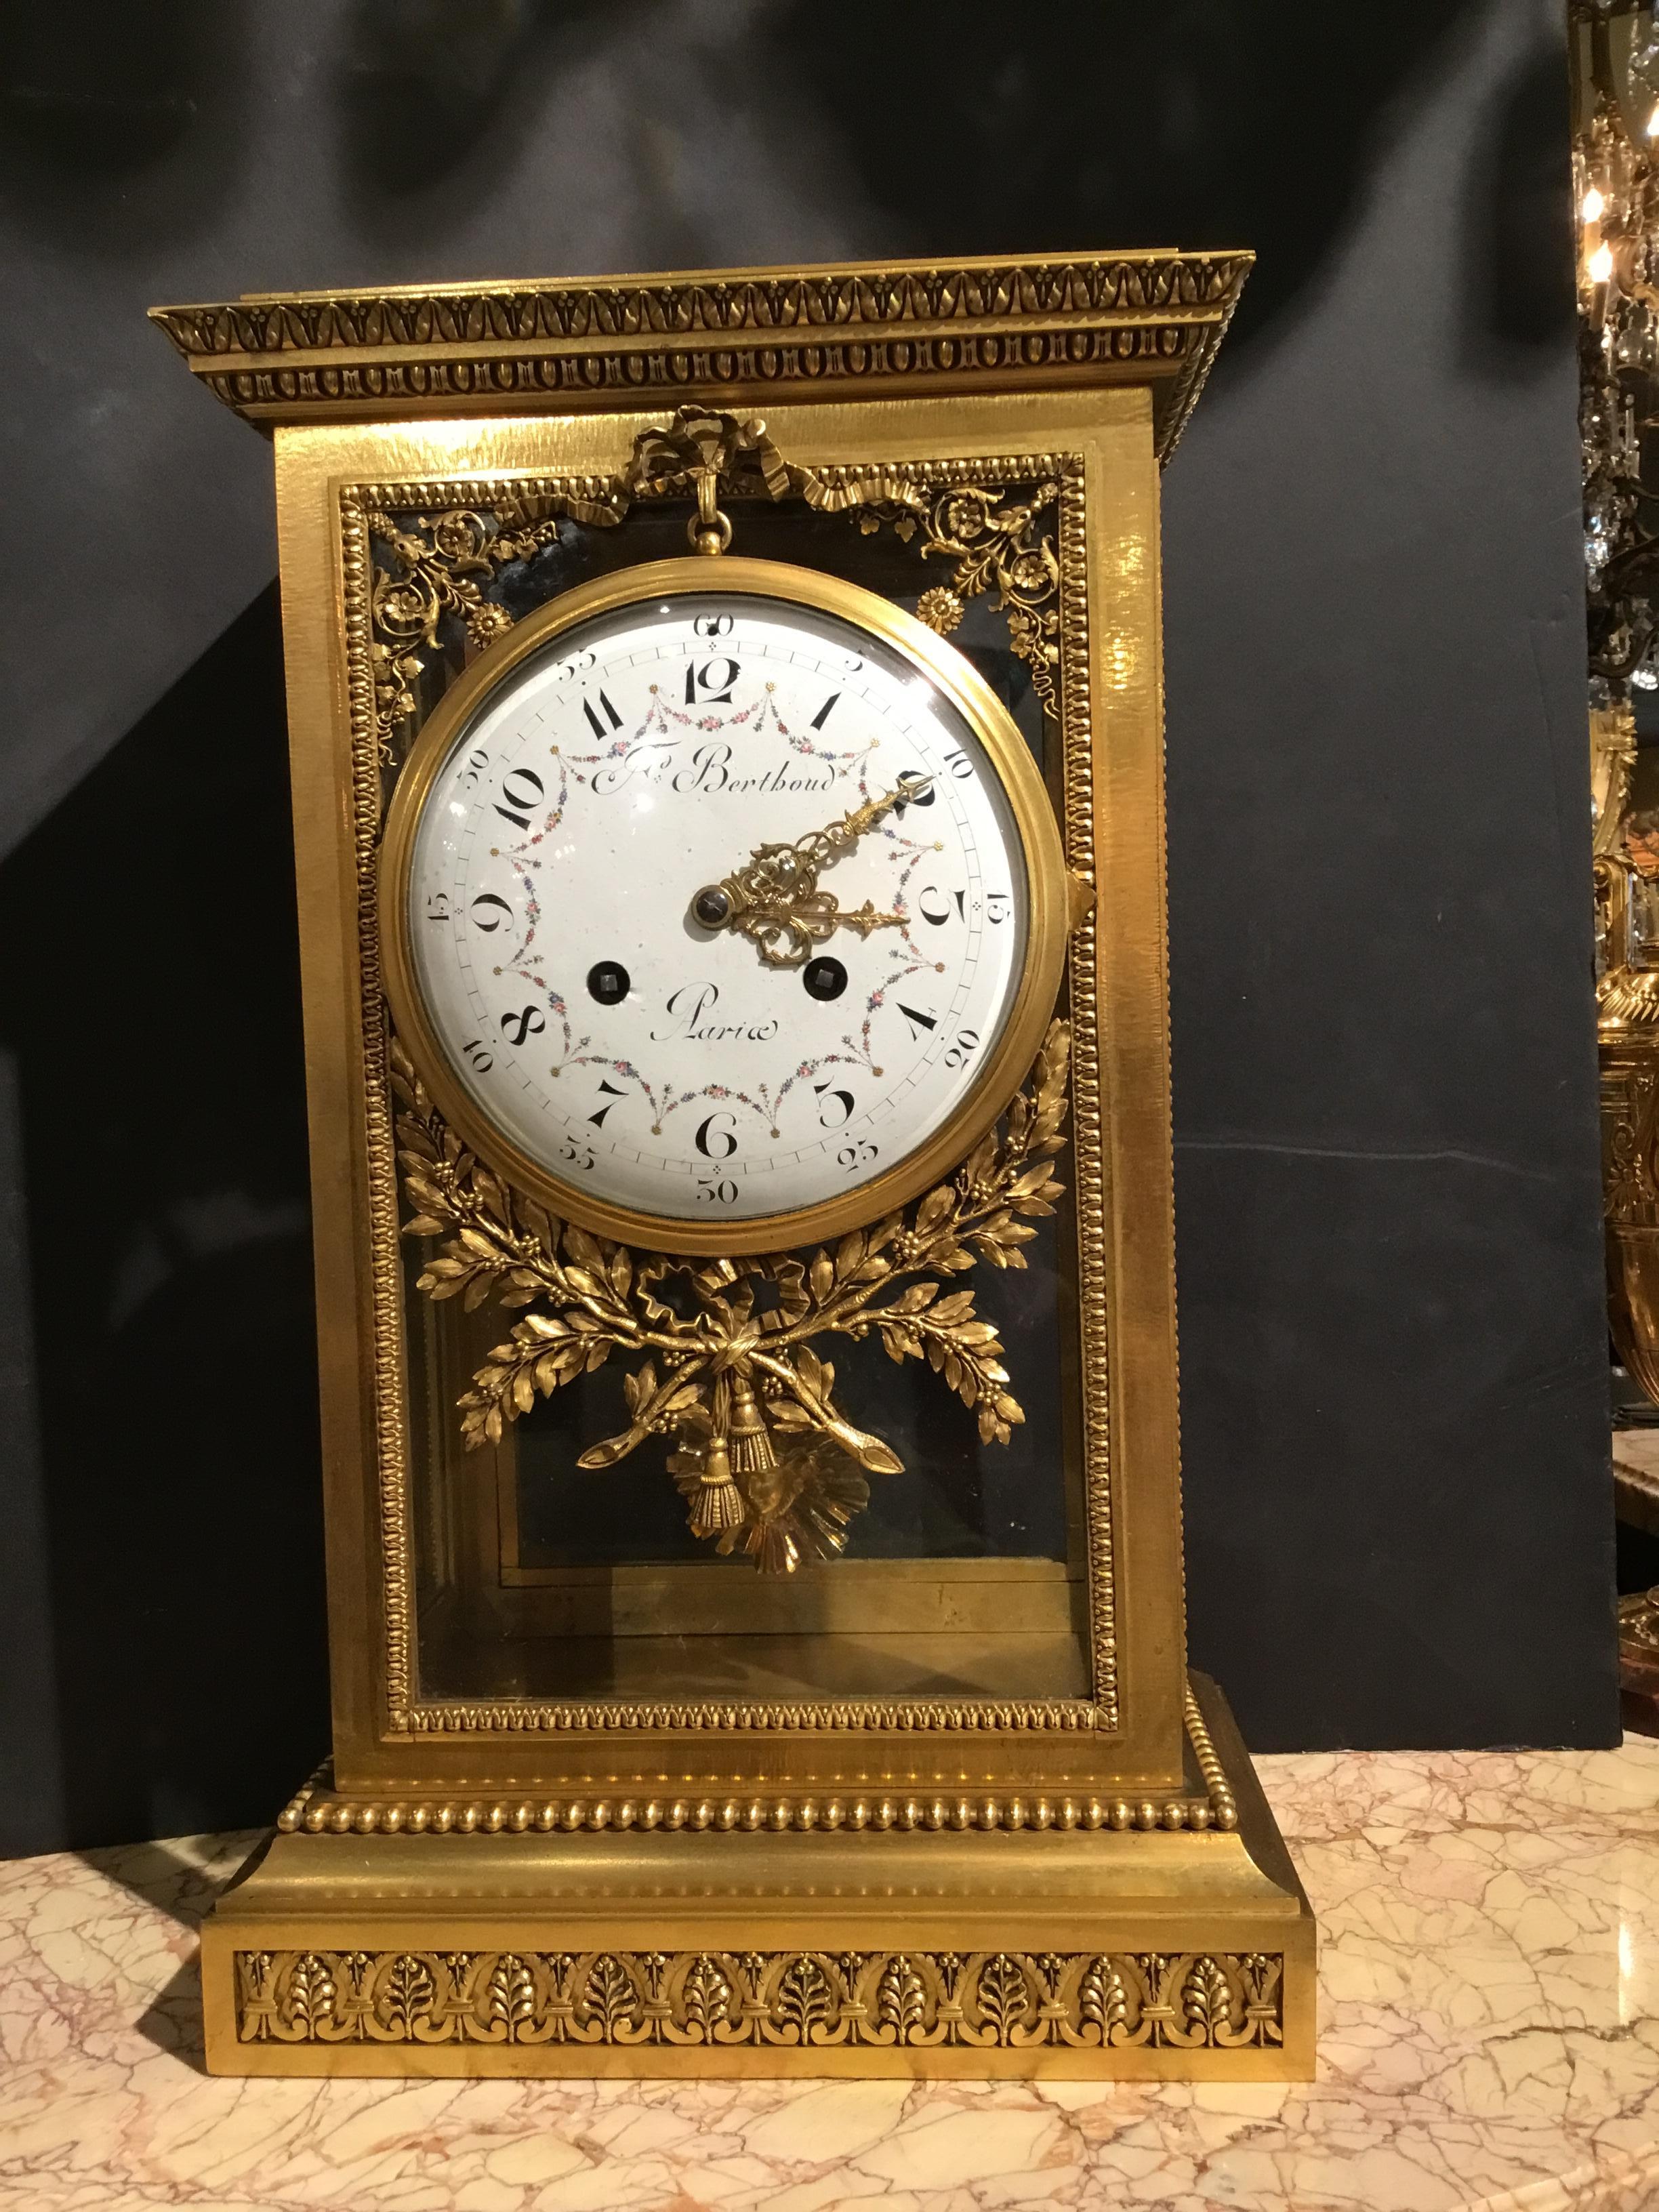 Gilt bronze mantel clock with white enamel face painted with delicate painting
Of pink and green garlands. Front face signed F Berthoud Paris. Glass and
Bronze dore case that is glass on all sides. Bowsand floral embellishments
Adorn the front